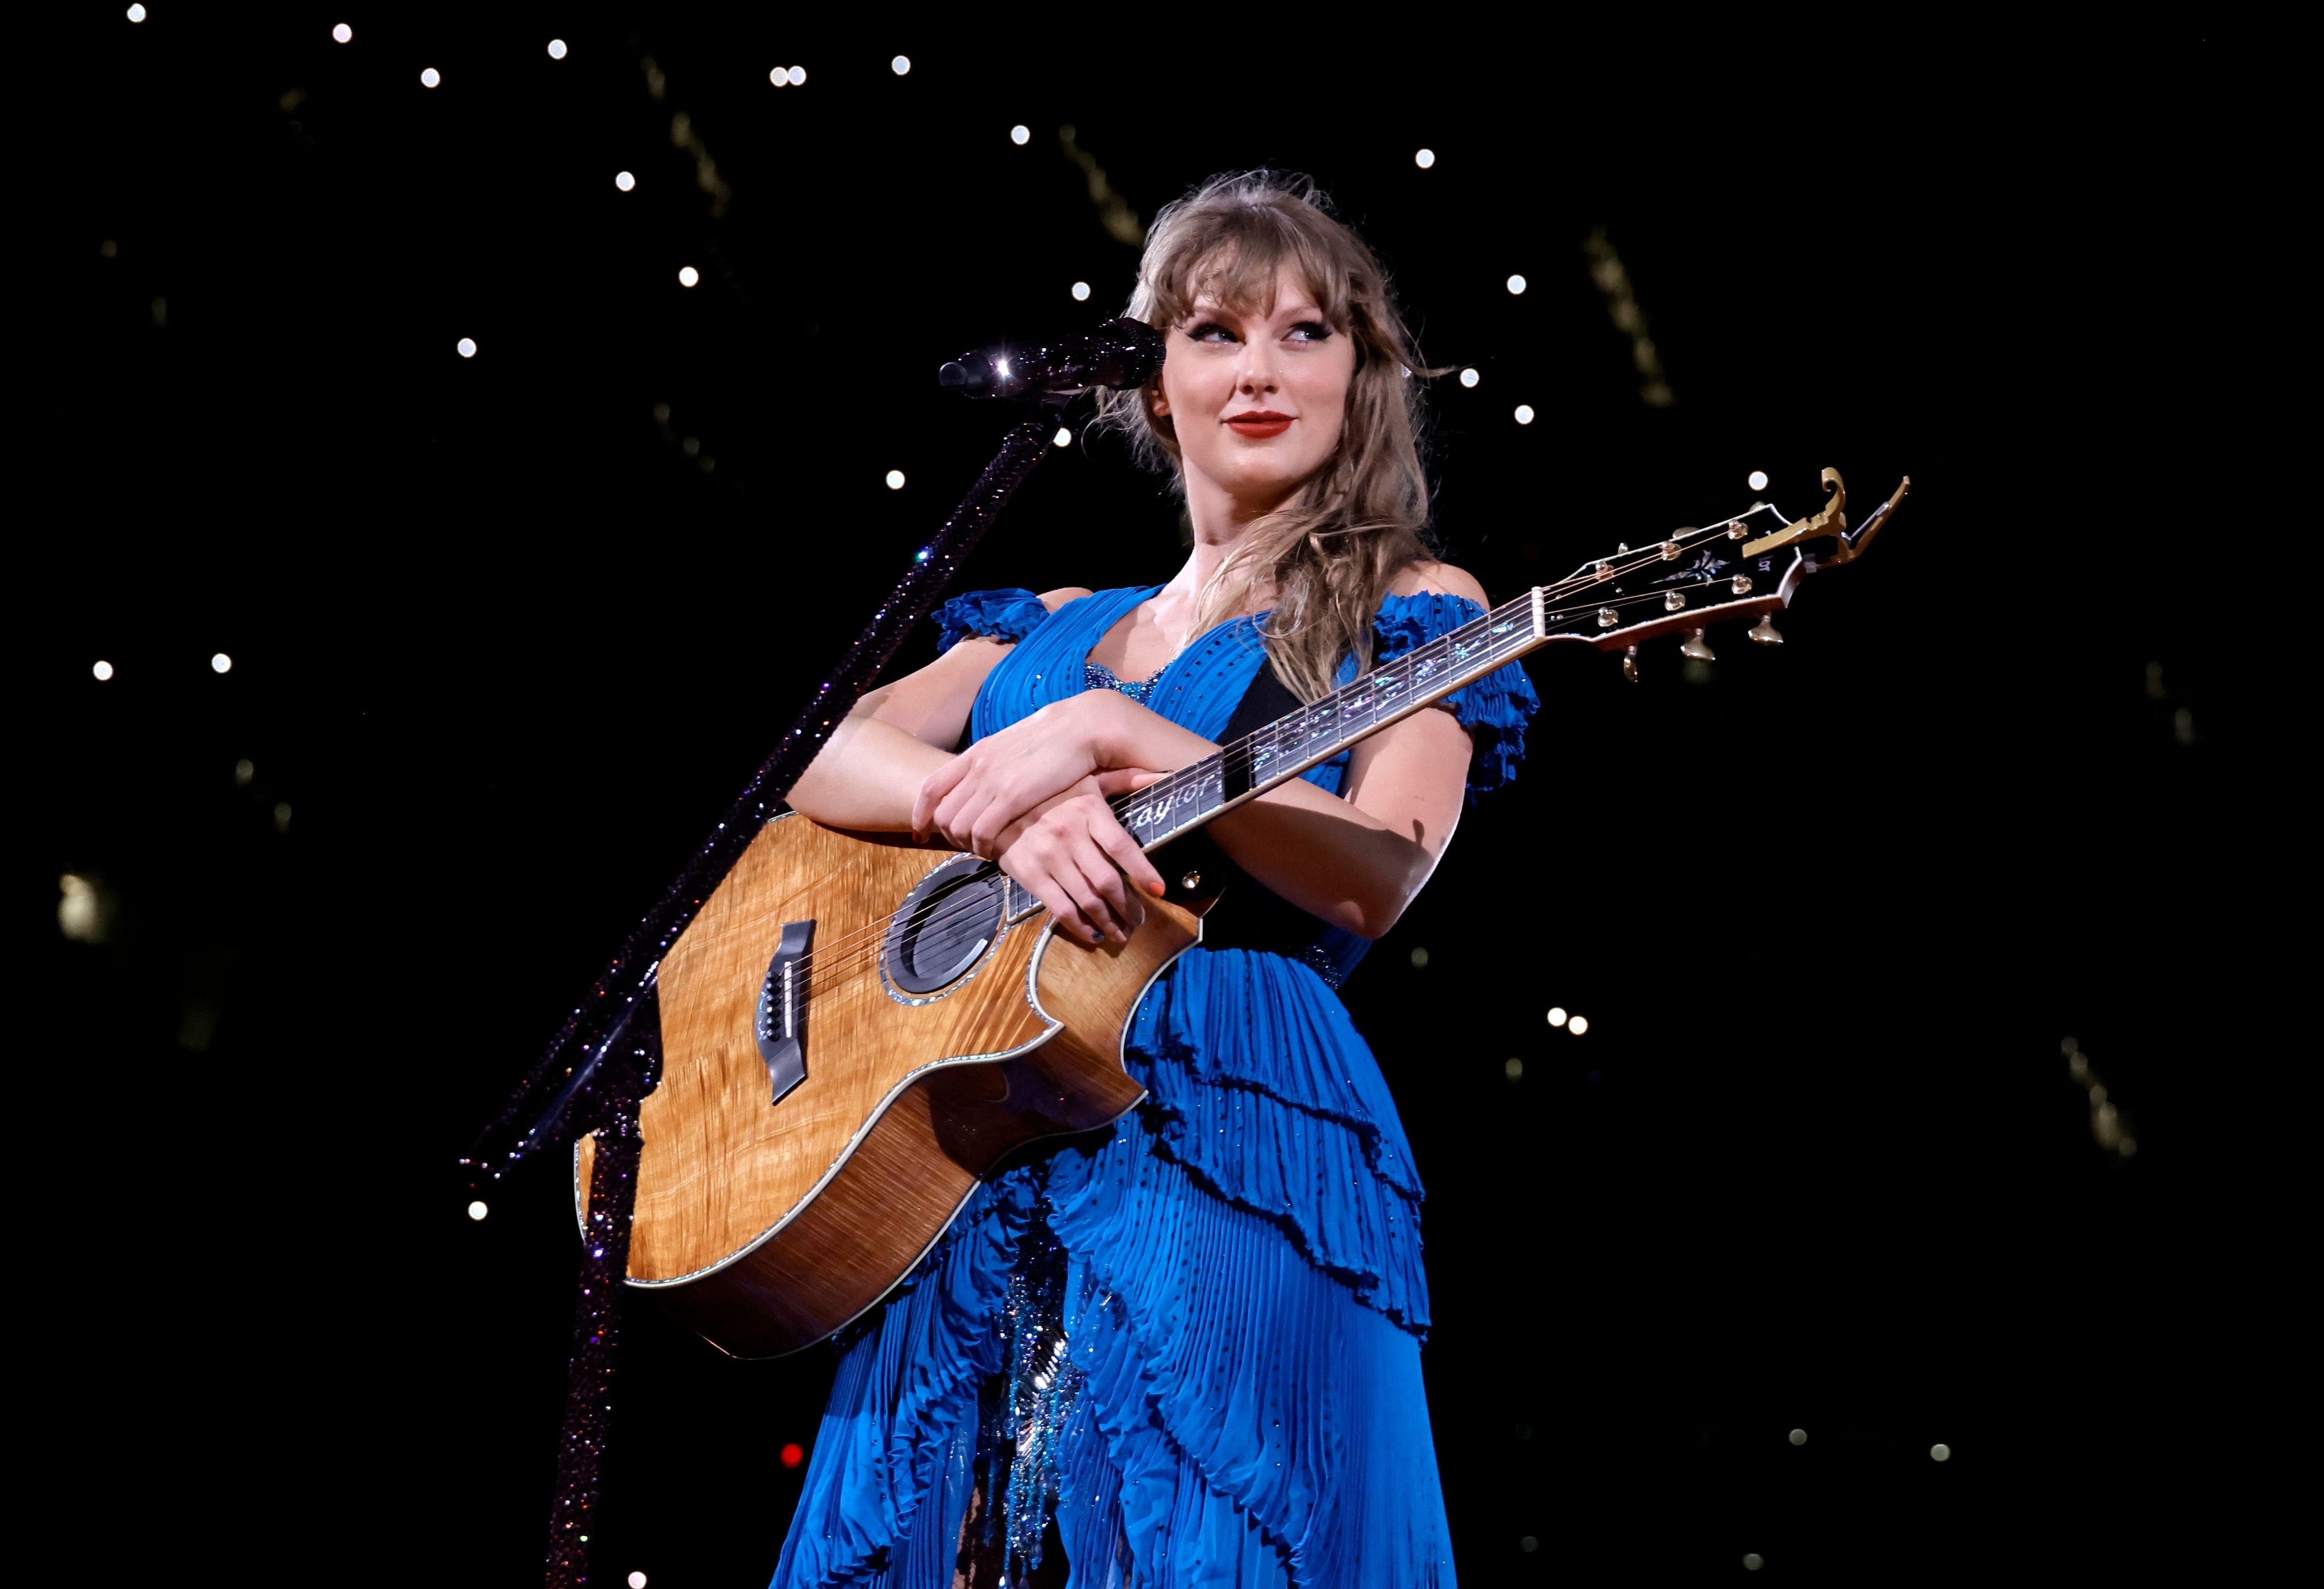 Close-up of Taylor performing with a guitar